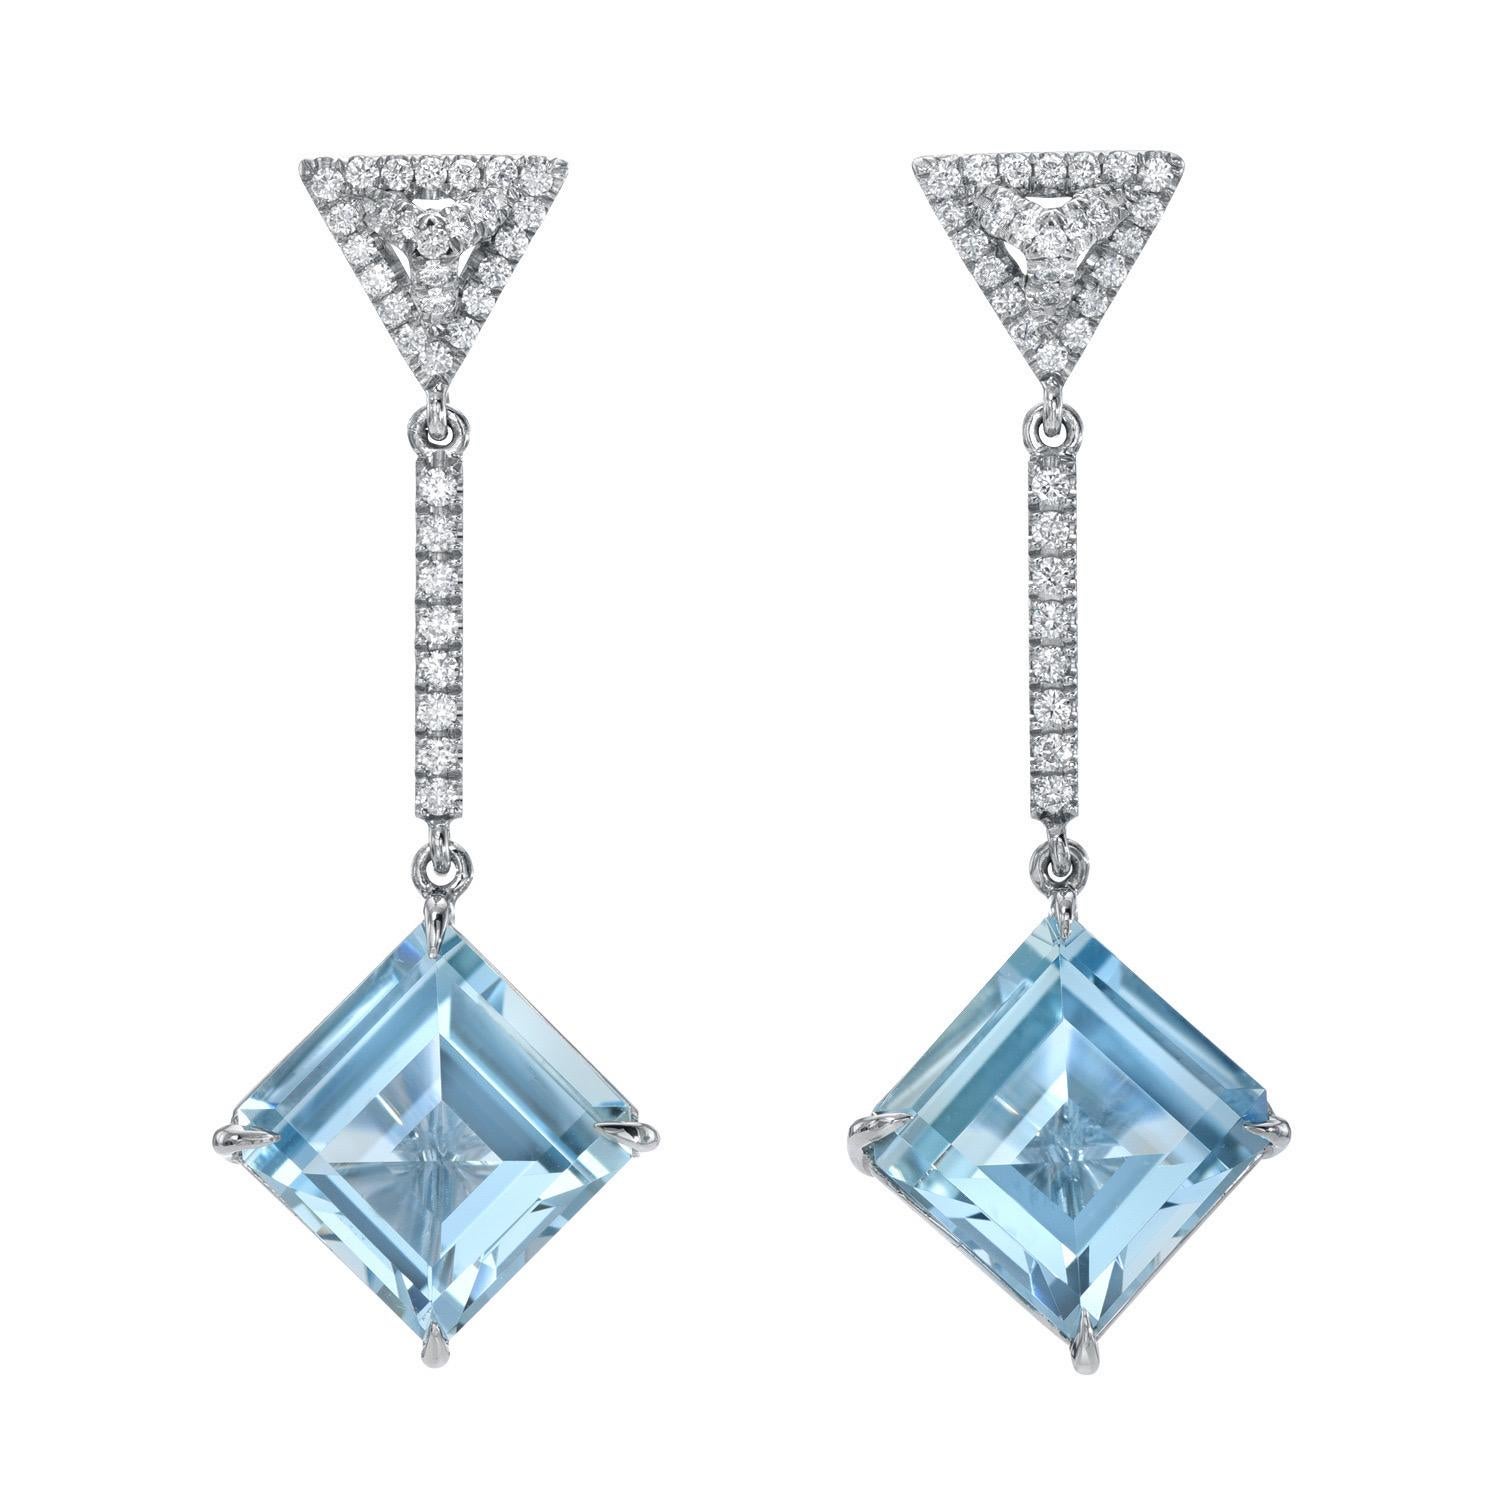 Contemporary Aquamarine Earrings 5.87 Carat Kite Shapes For Sale